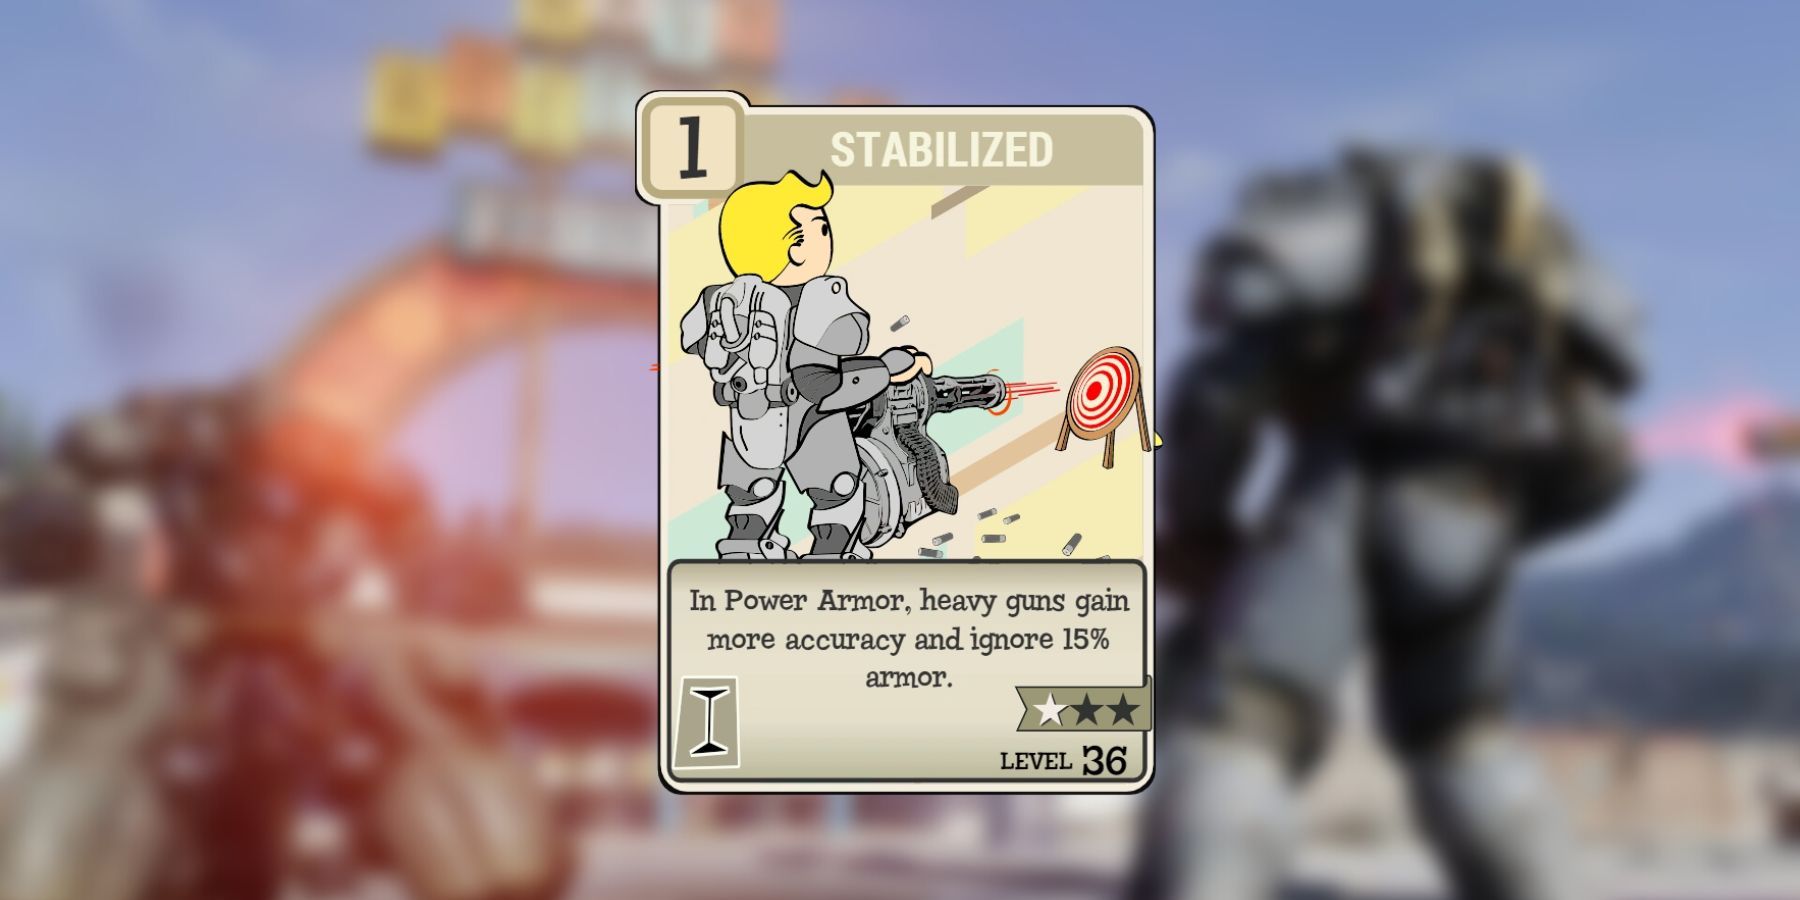 image showing the stabilized perk card for power armor.